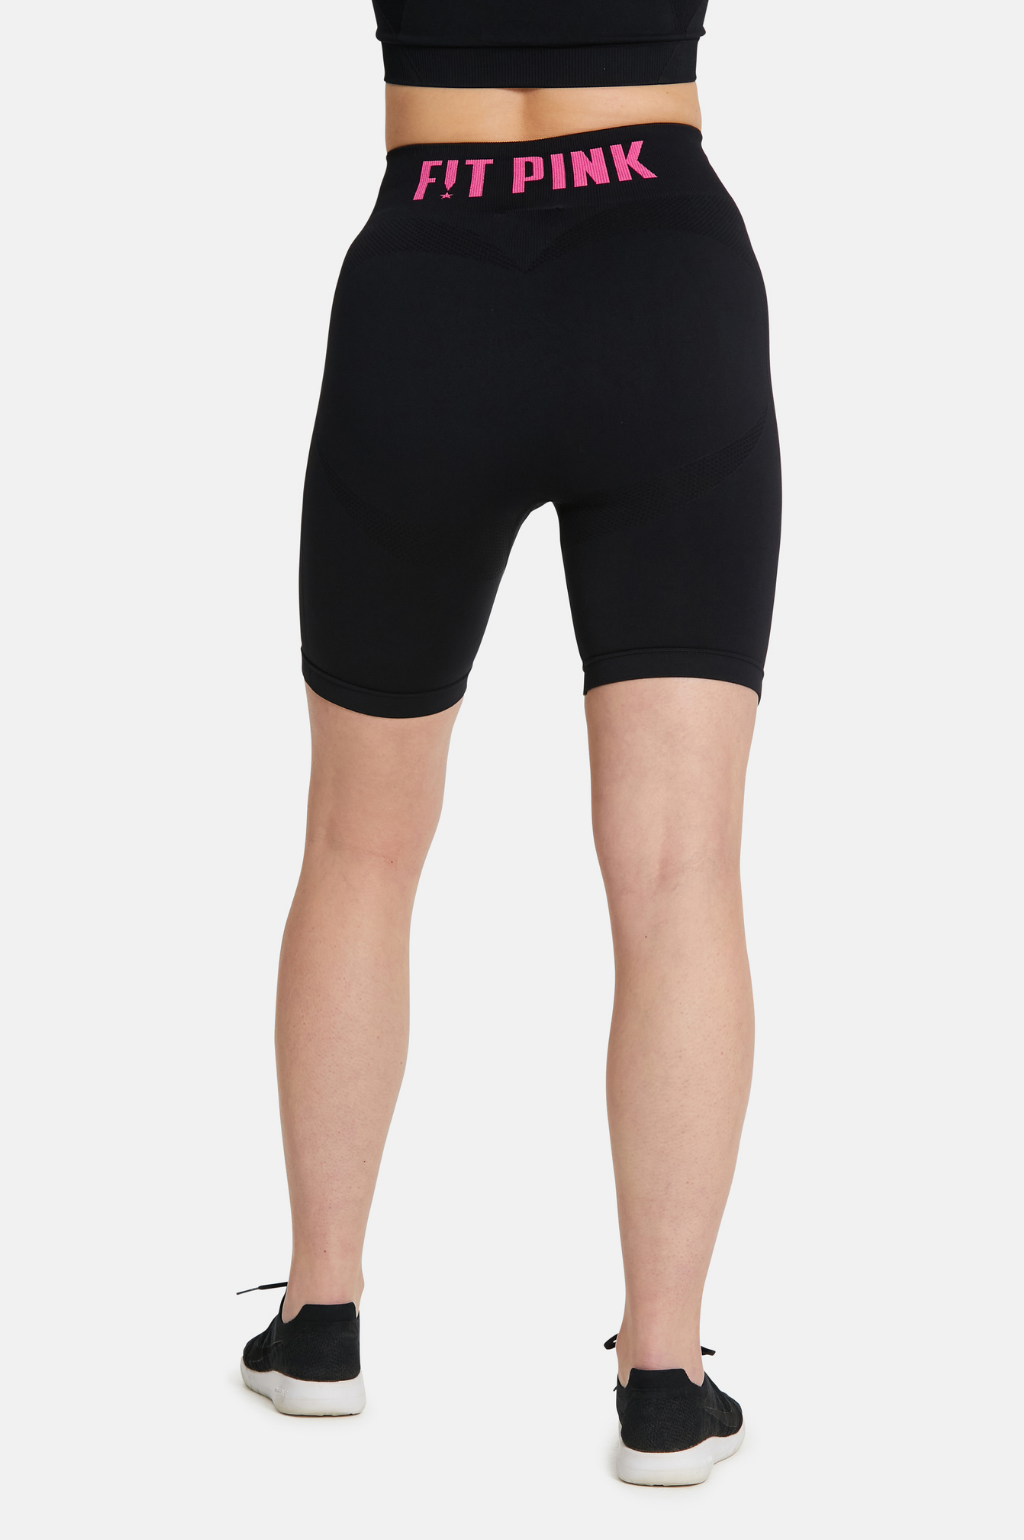 Seamless Compression Shorts in Black